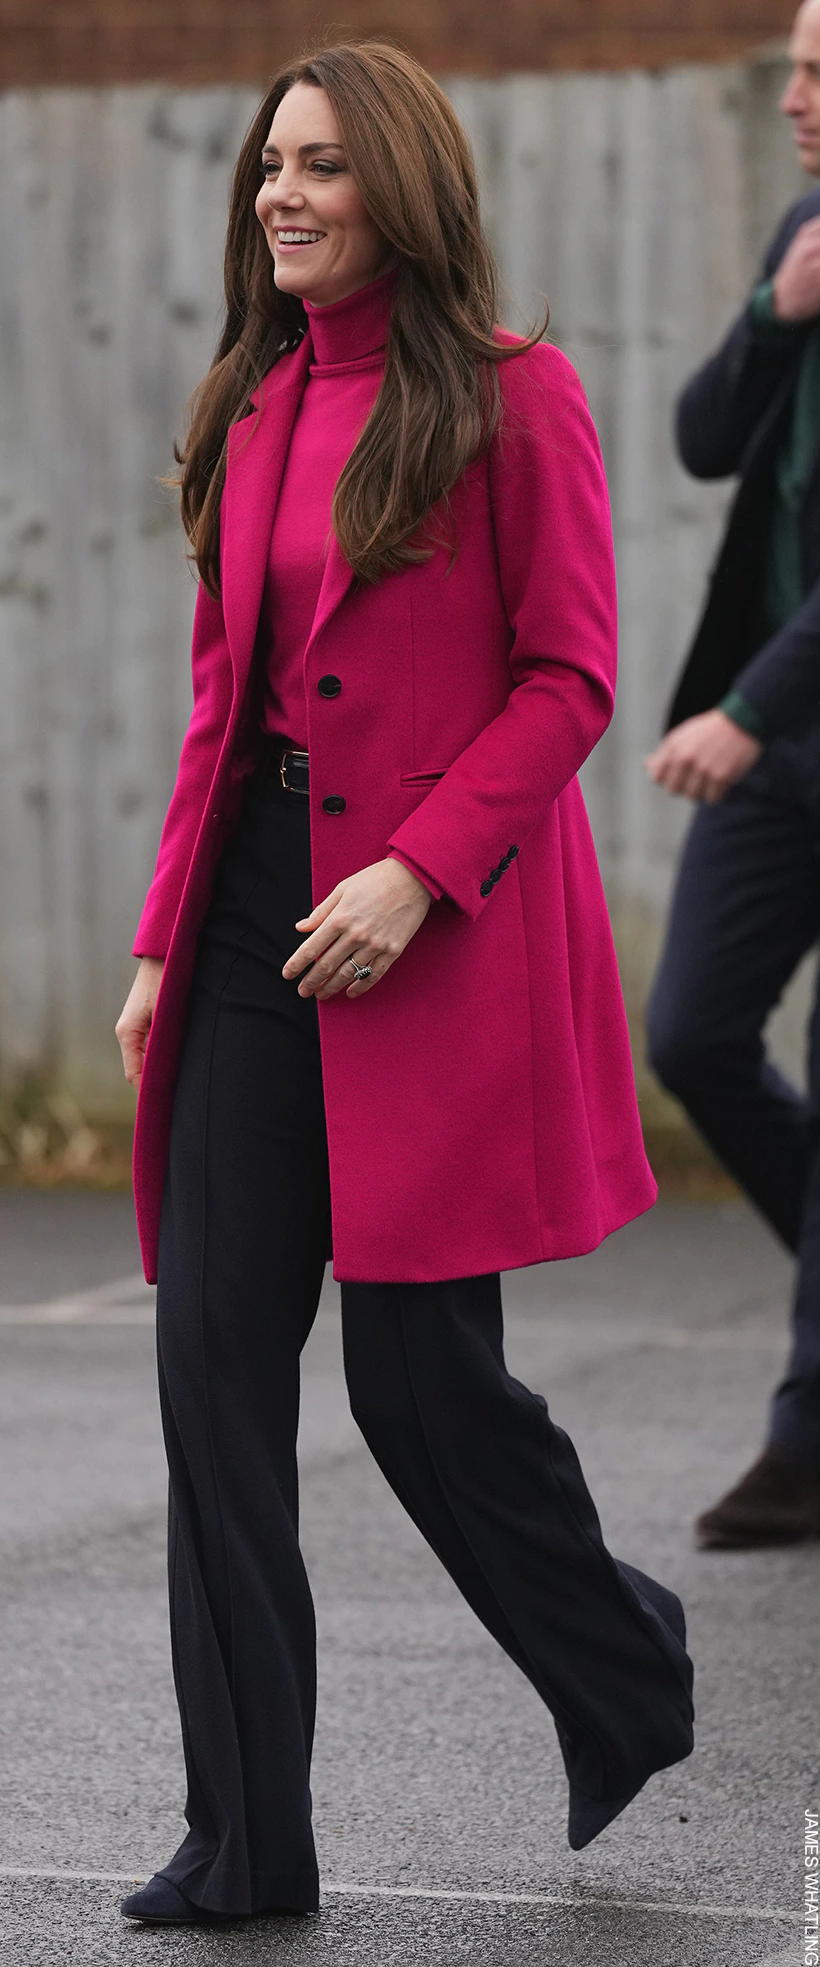 Kate Middleton's Brings a Pop of Colour to Windsor Foodshare in Bright  Fuchsia Coat